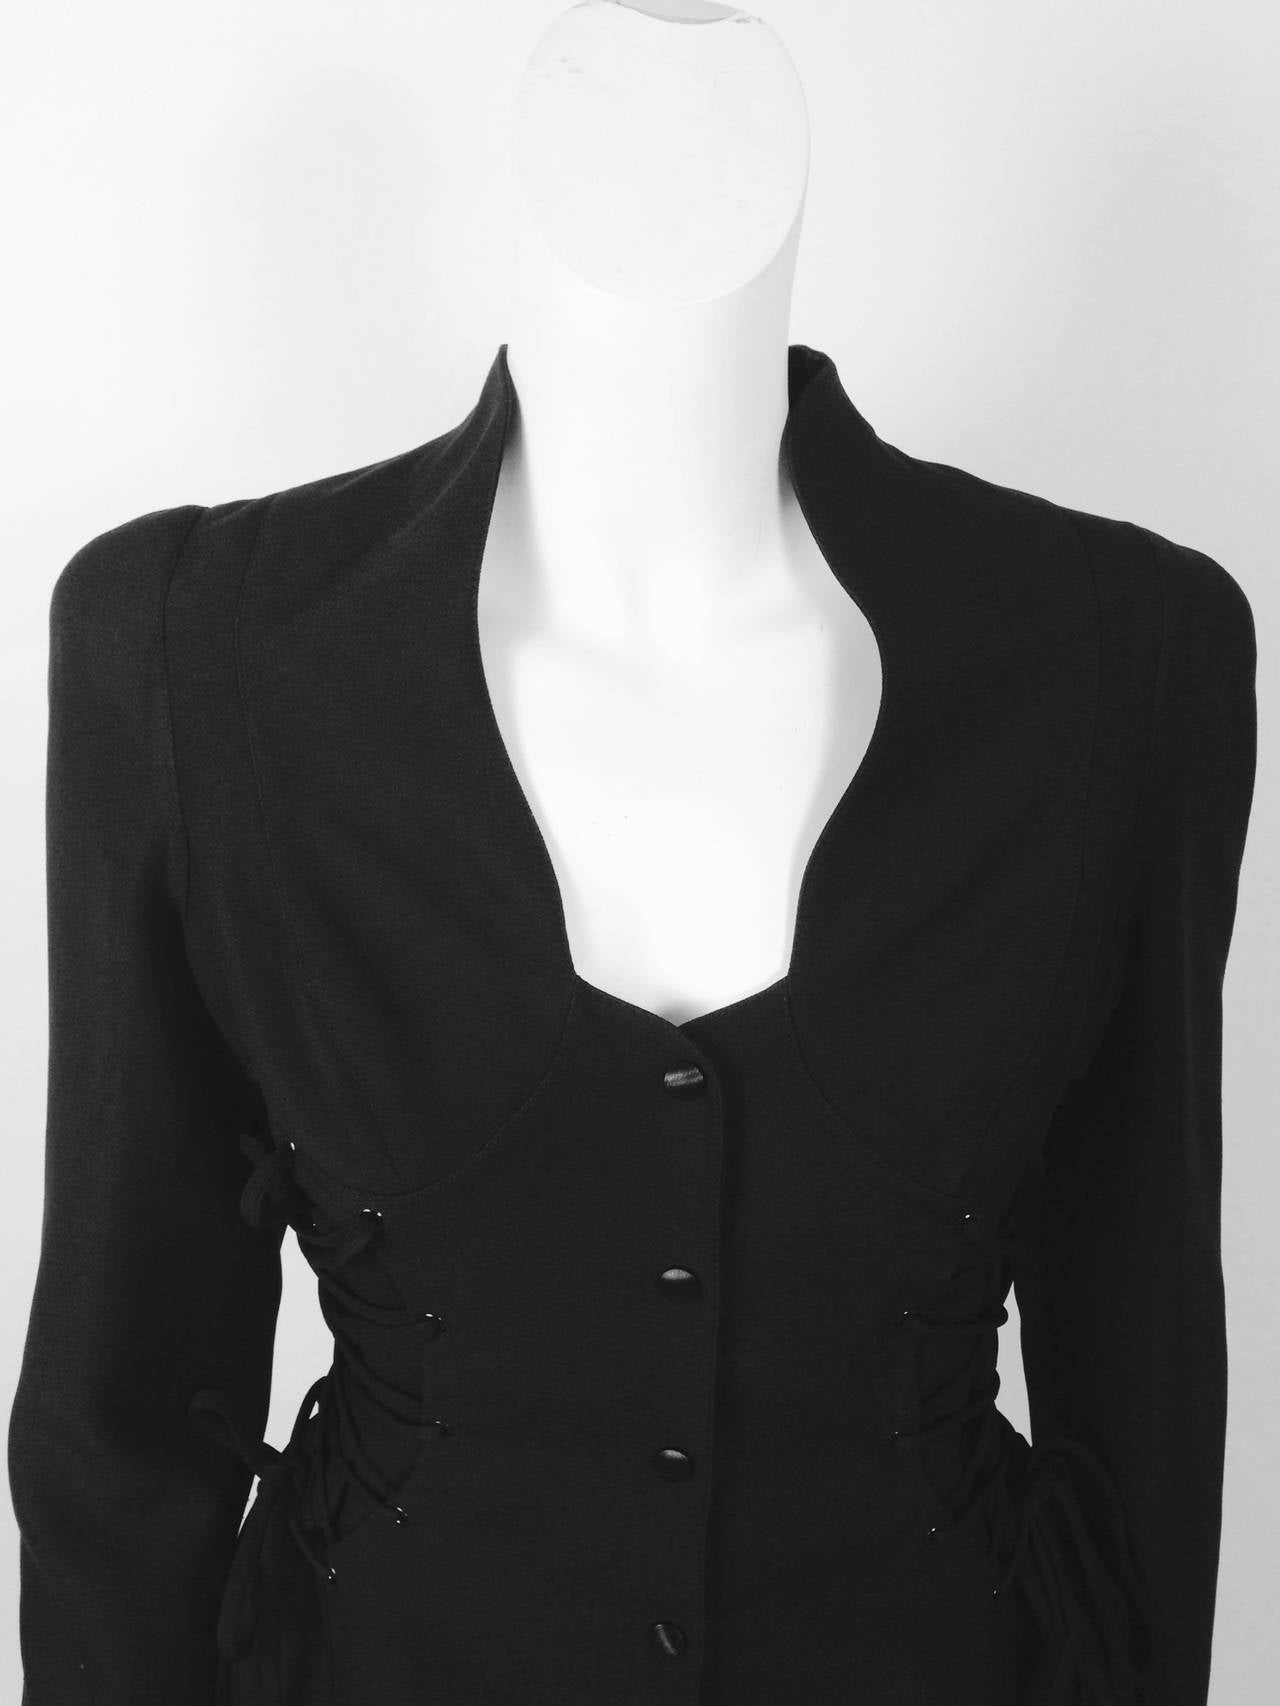 Vintage Thierry Mugler Black Suit With Corseted Jacket For Sale 2